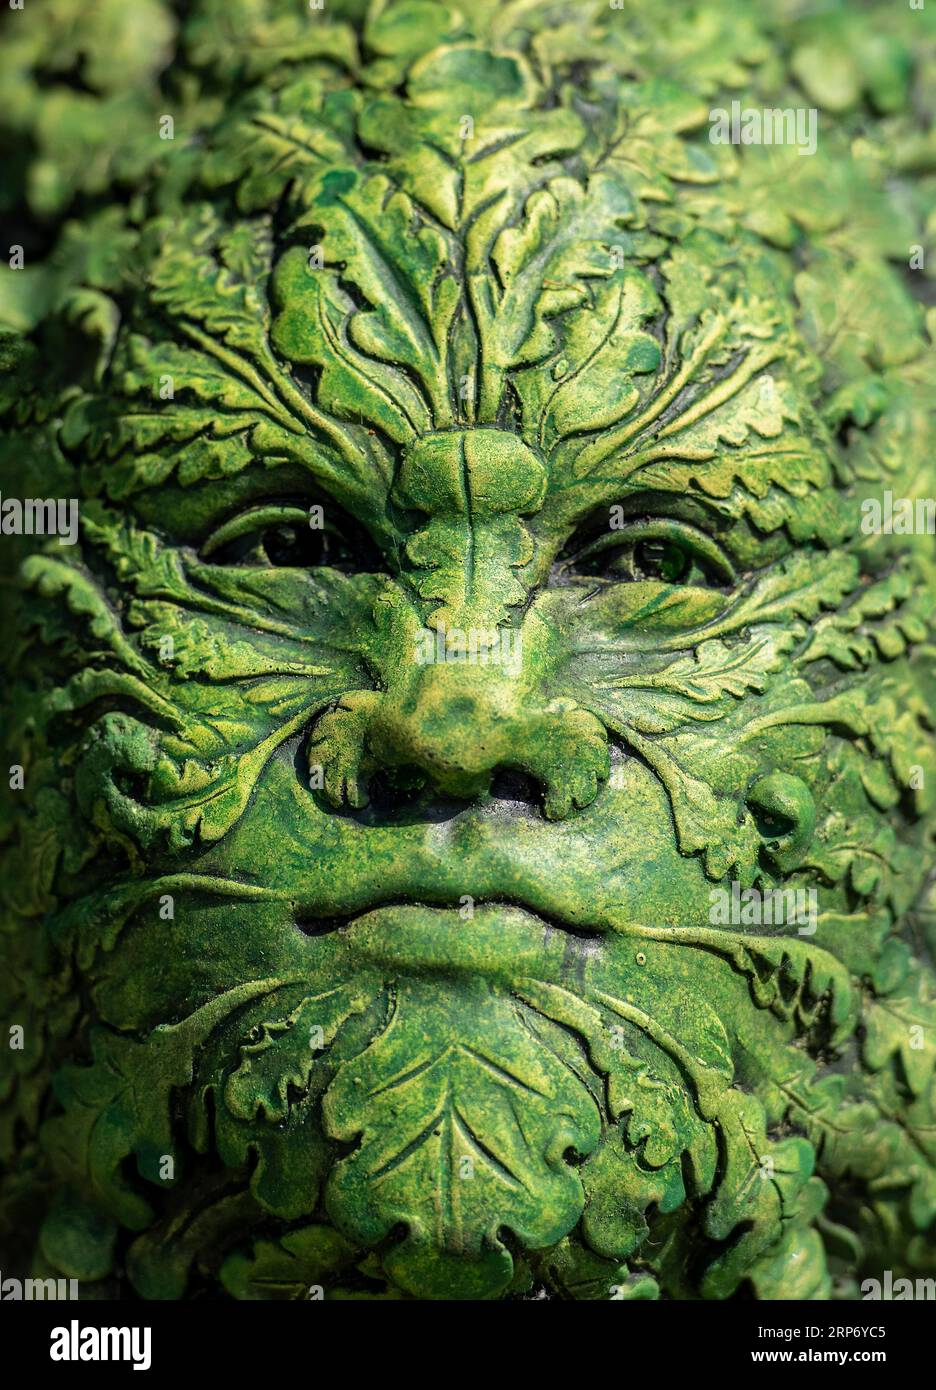 green man garden ornament or decoration with foliate head surrounded by leaves and foliage. Stock Photo